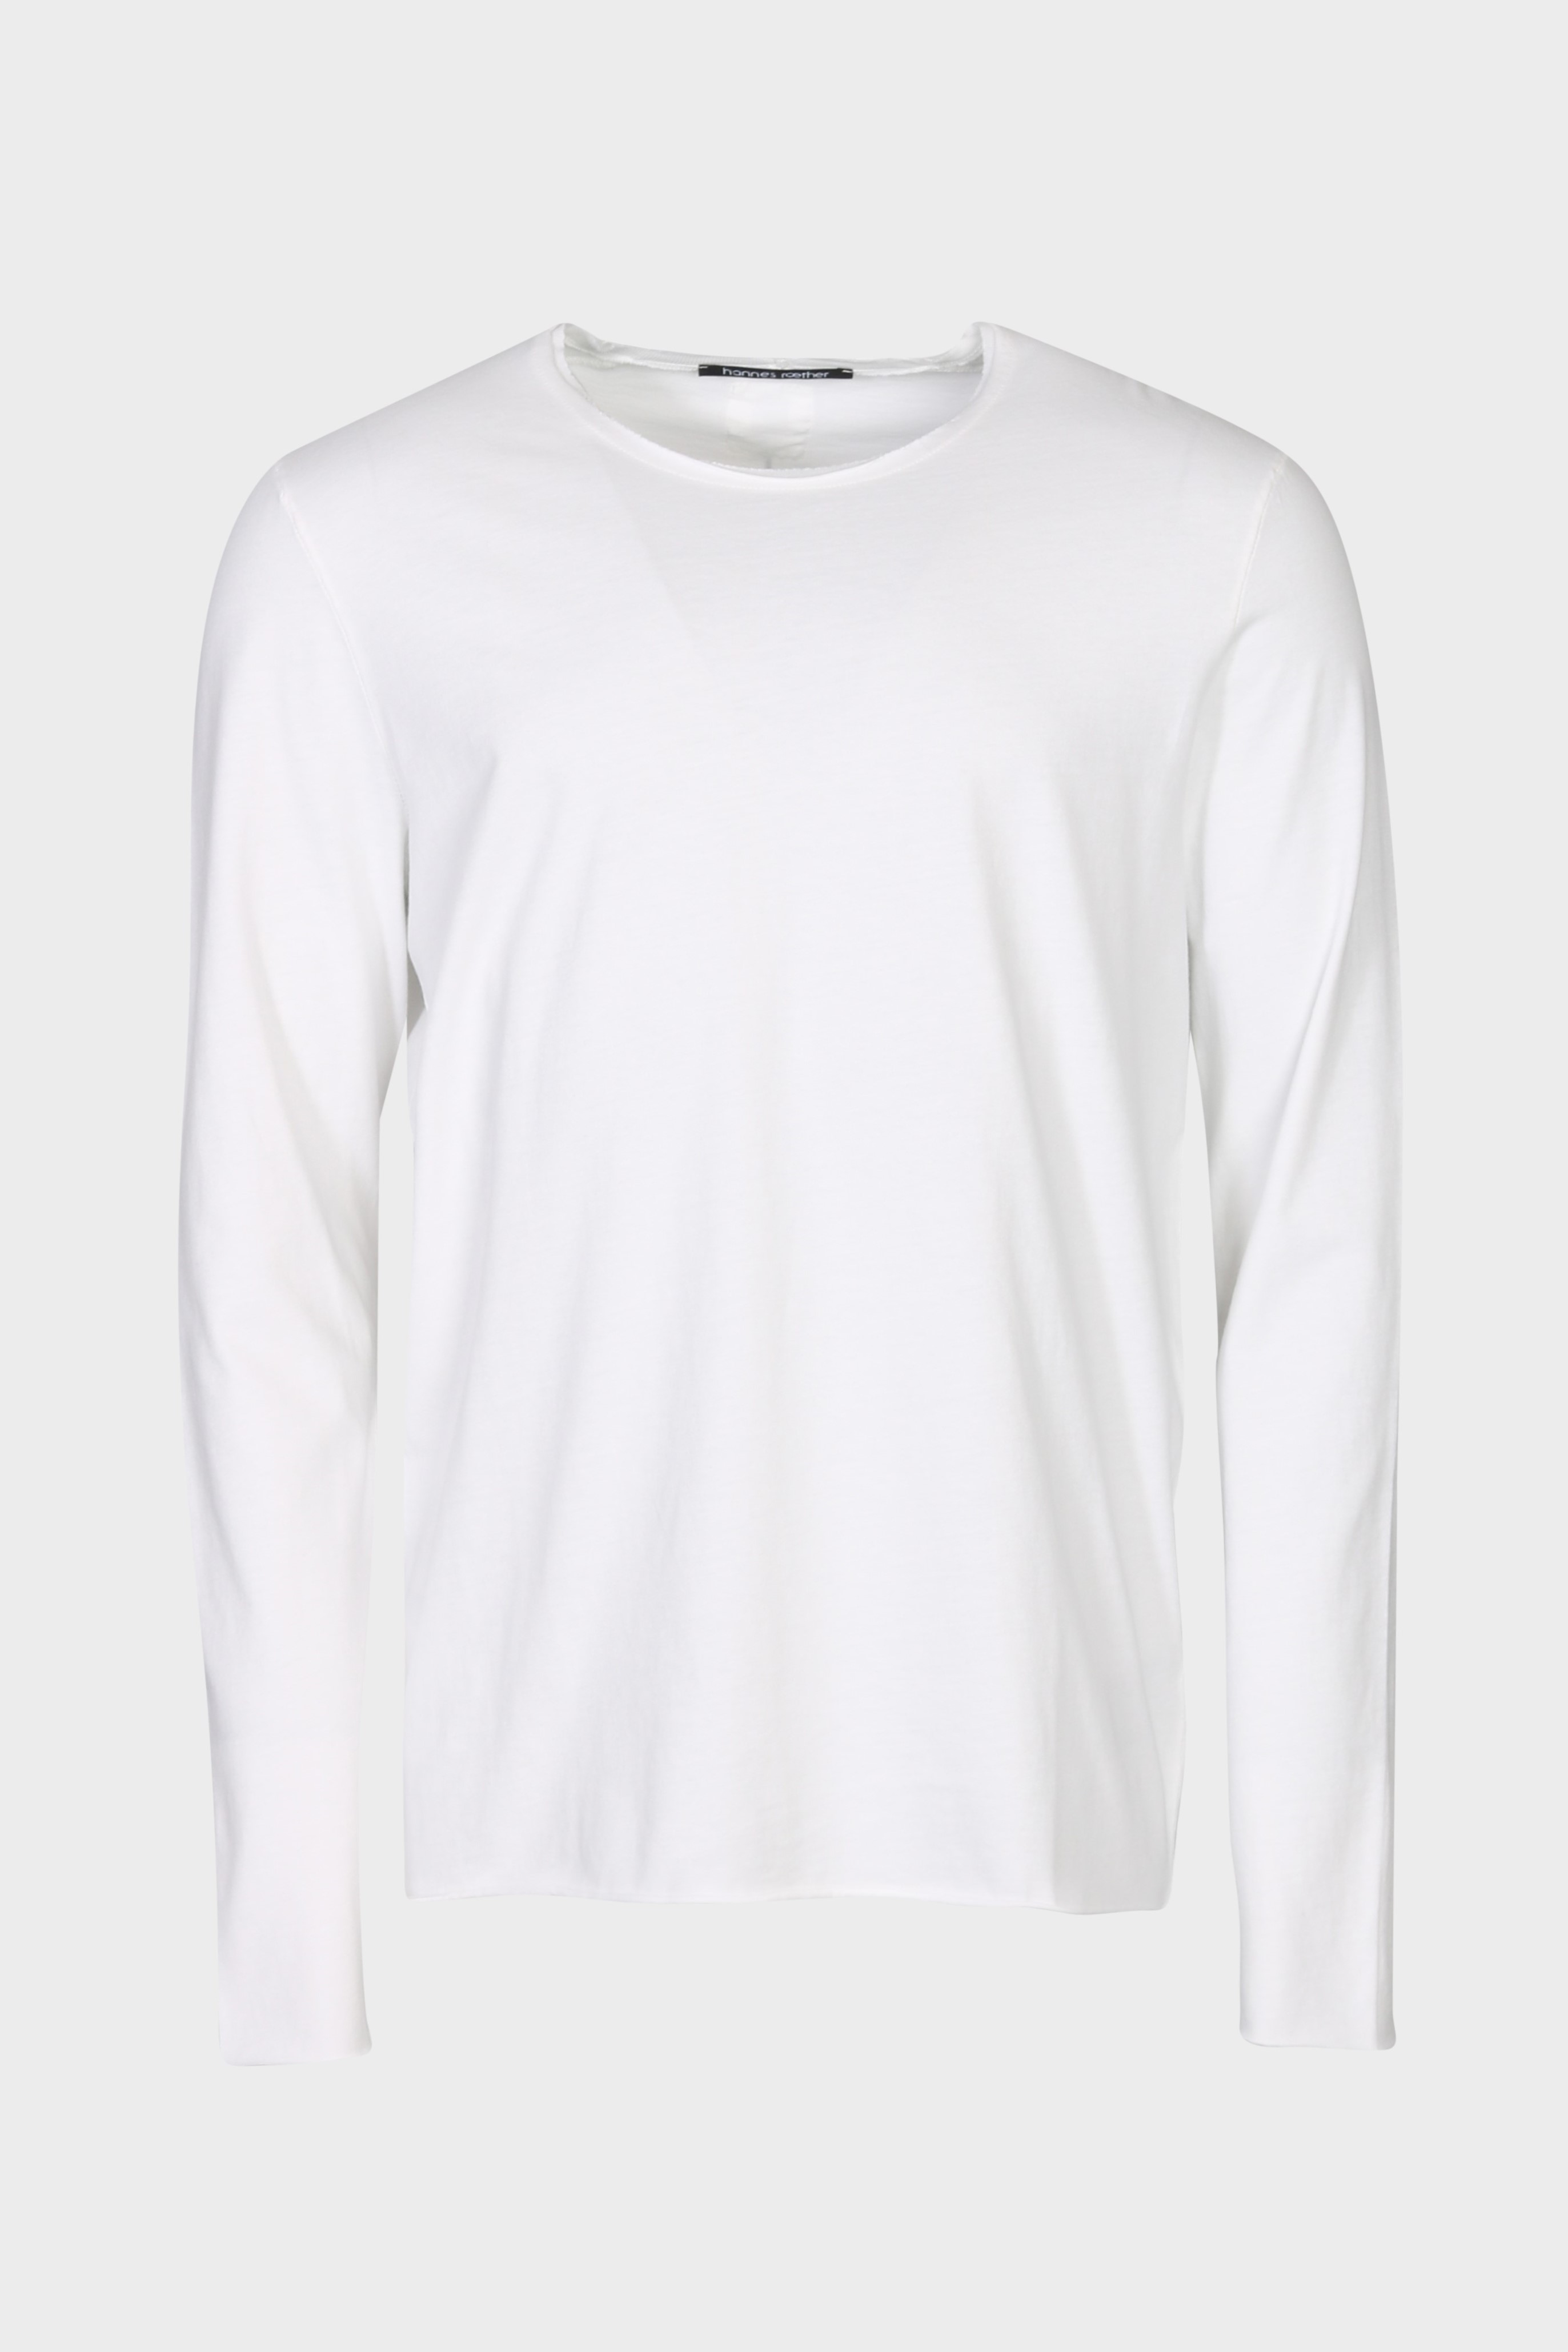 HANNES ROETHER Longsleeve in Off White S